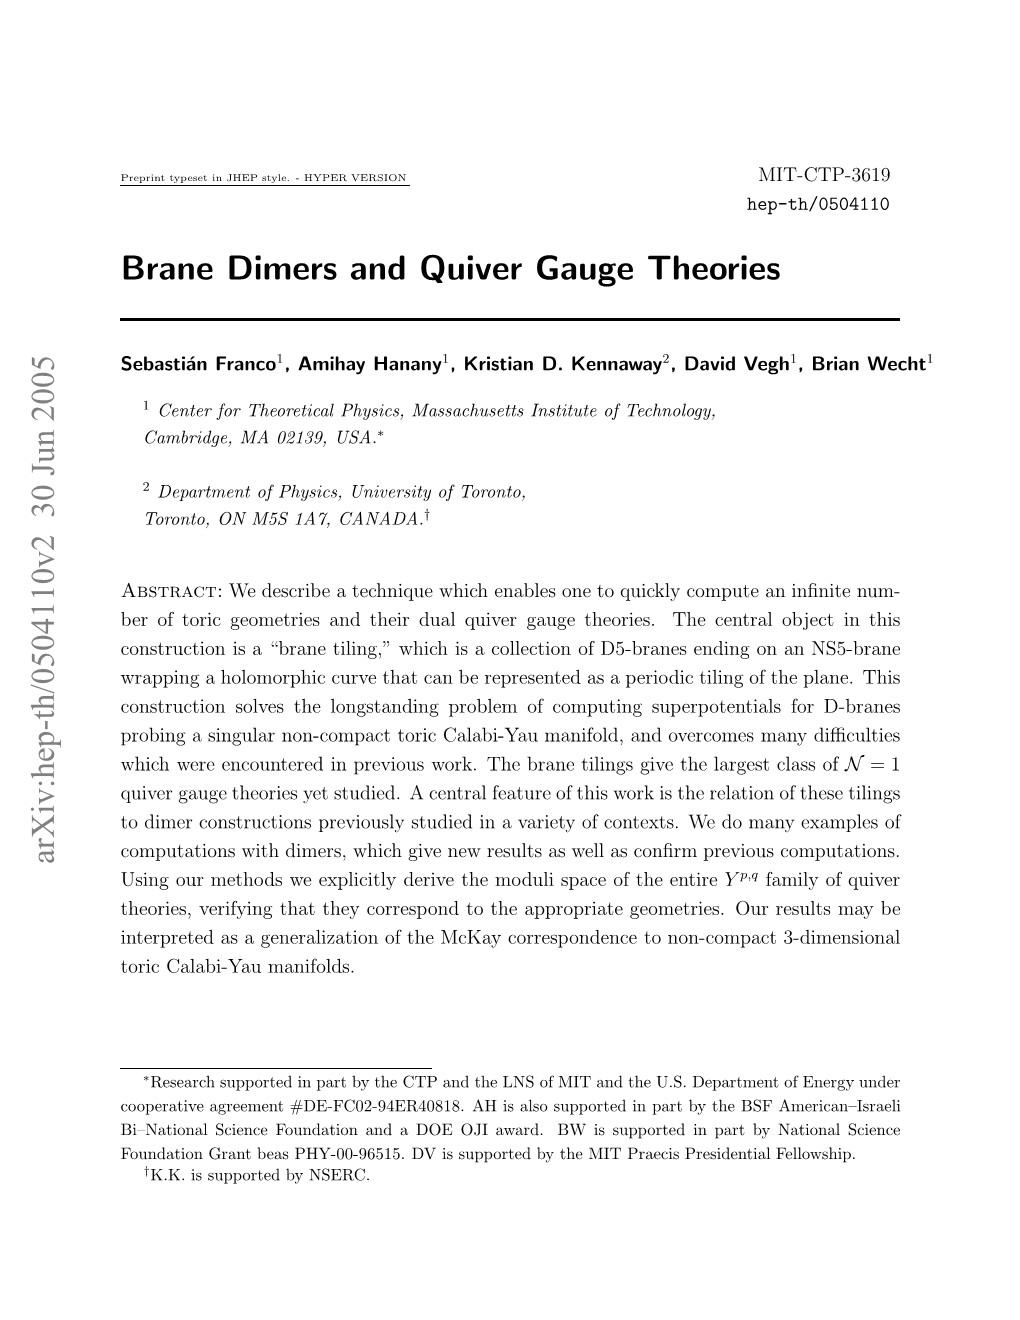 Brane Dimers and Quiver Gauge Theories